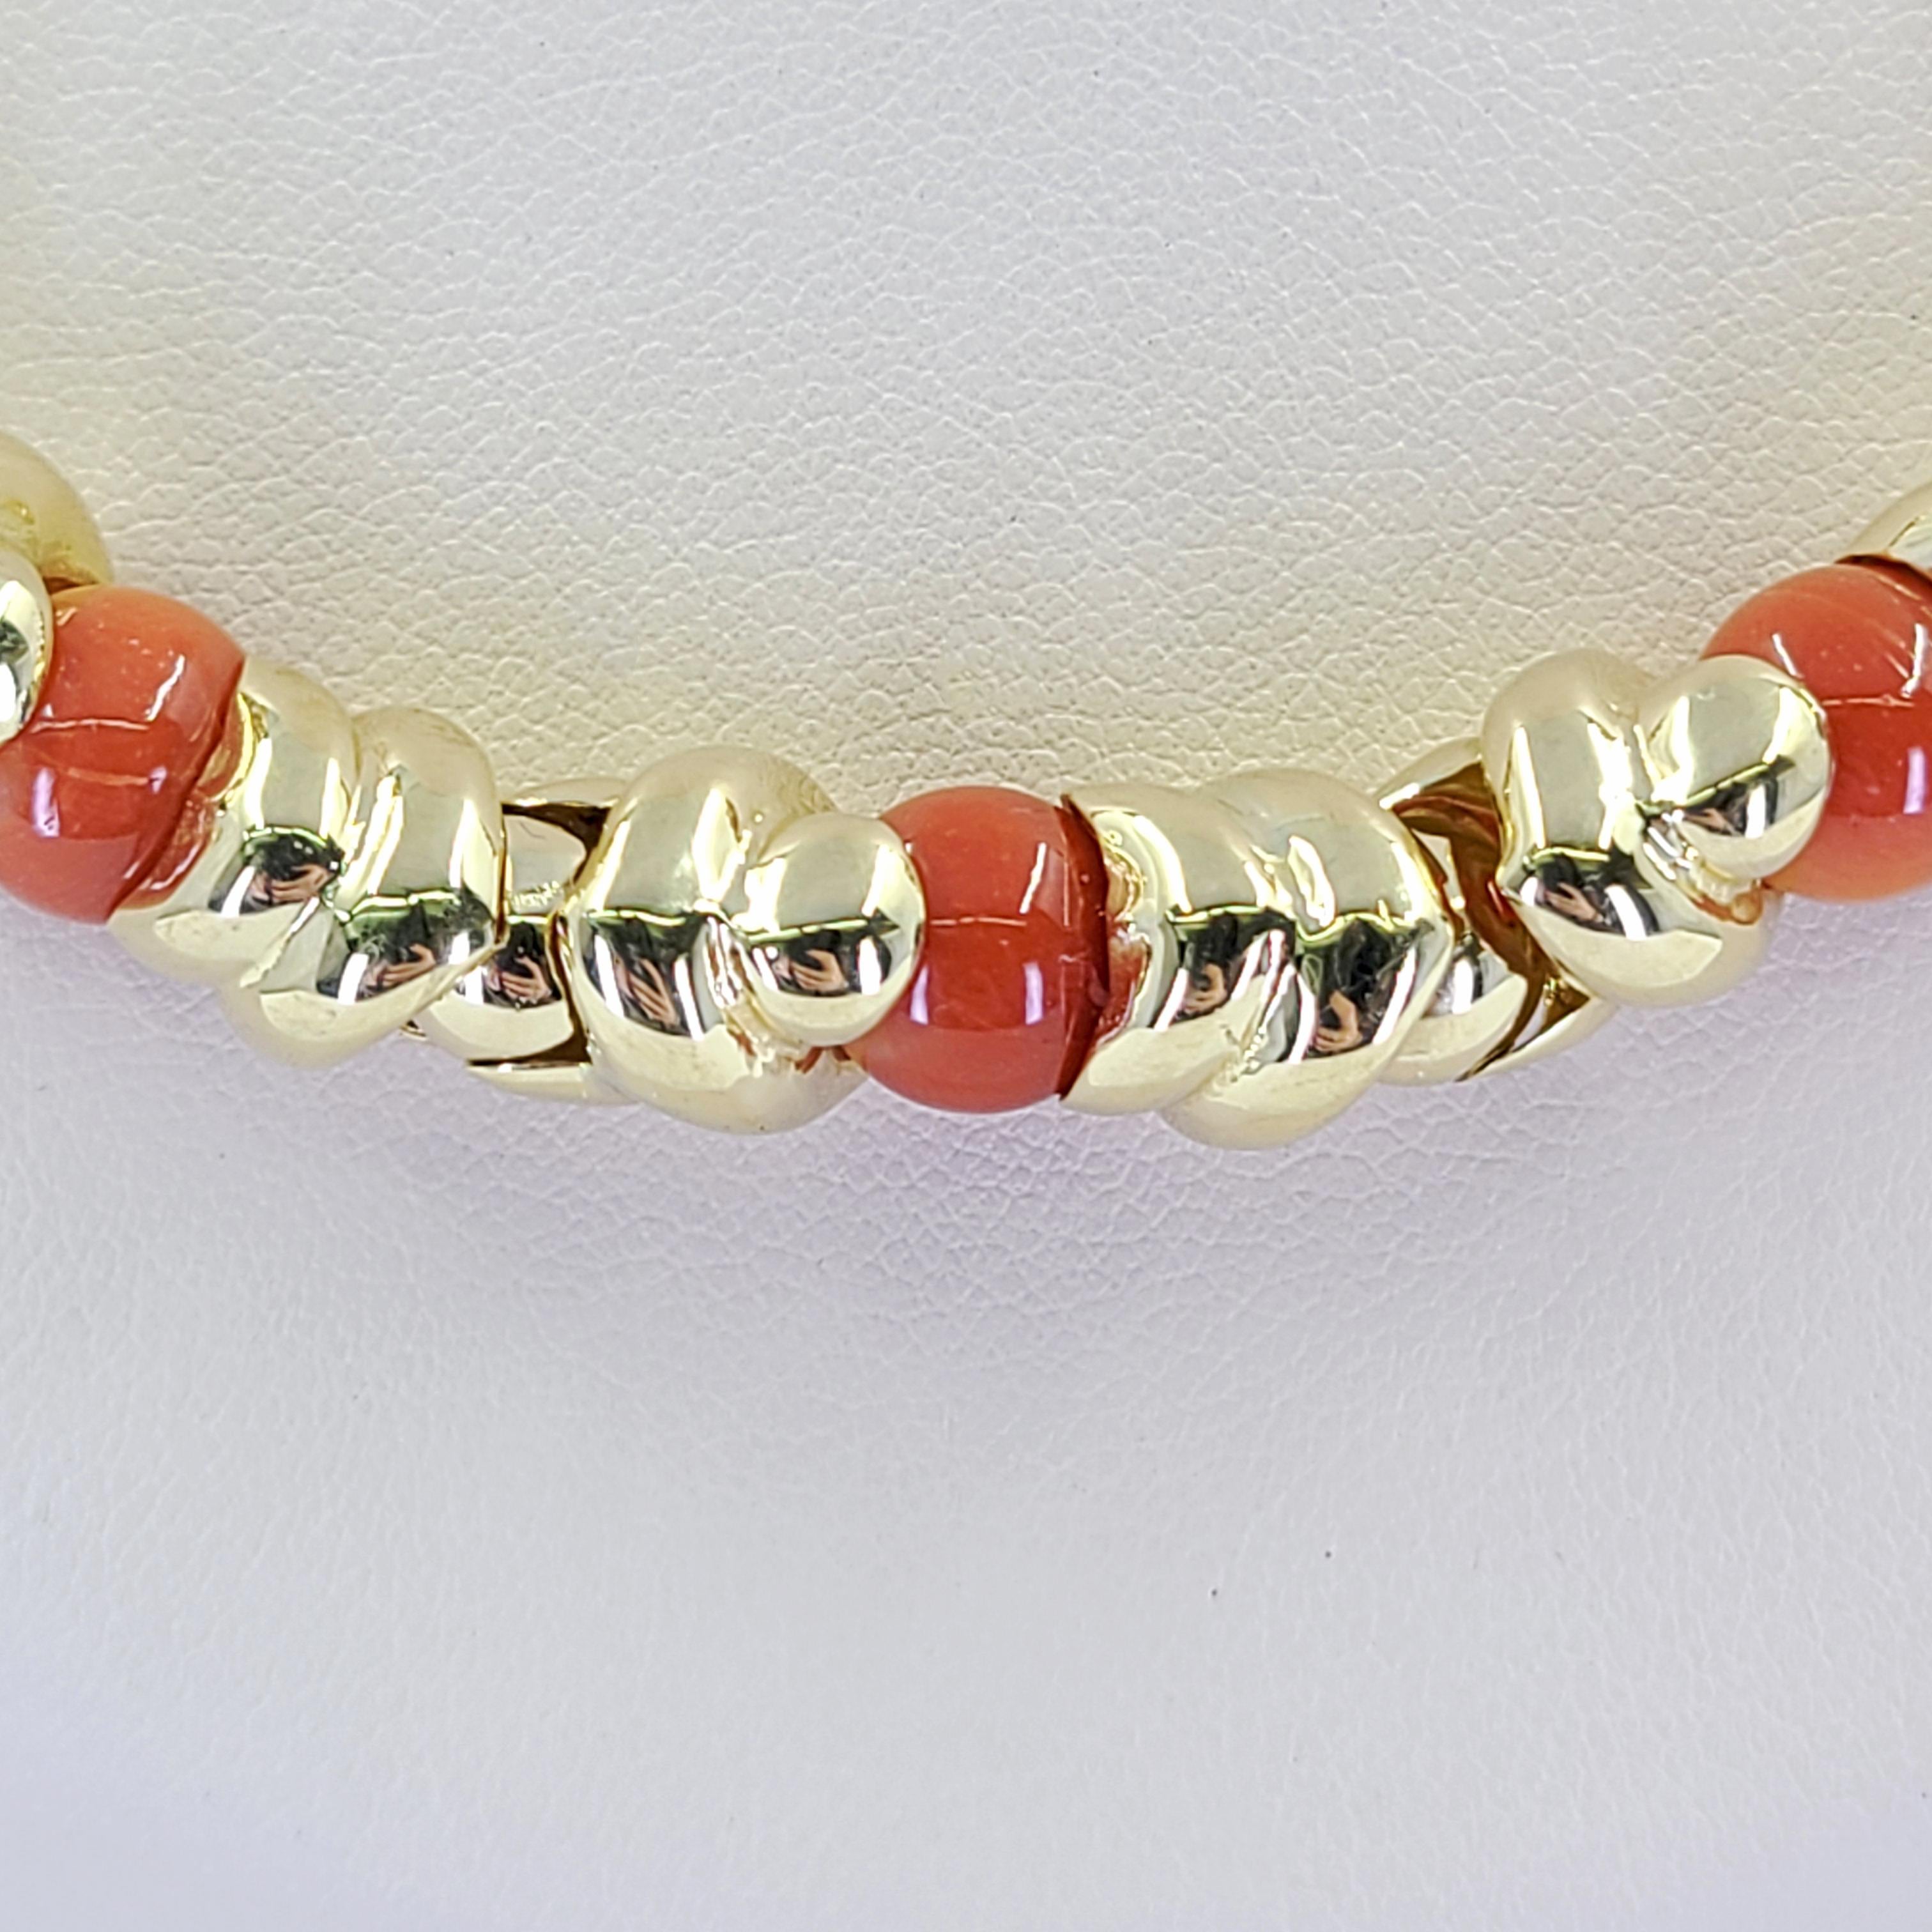 18 Karat Yellow Gold Link Collar Necklace Featuring 21 Round 8mm Coral Beads. 18.5 Inches Long With Hidden Box Clasp and Figure 8 Safety. Finished Weight Is 69.1 Grams. Matching bracelet available separately.